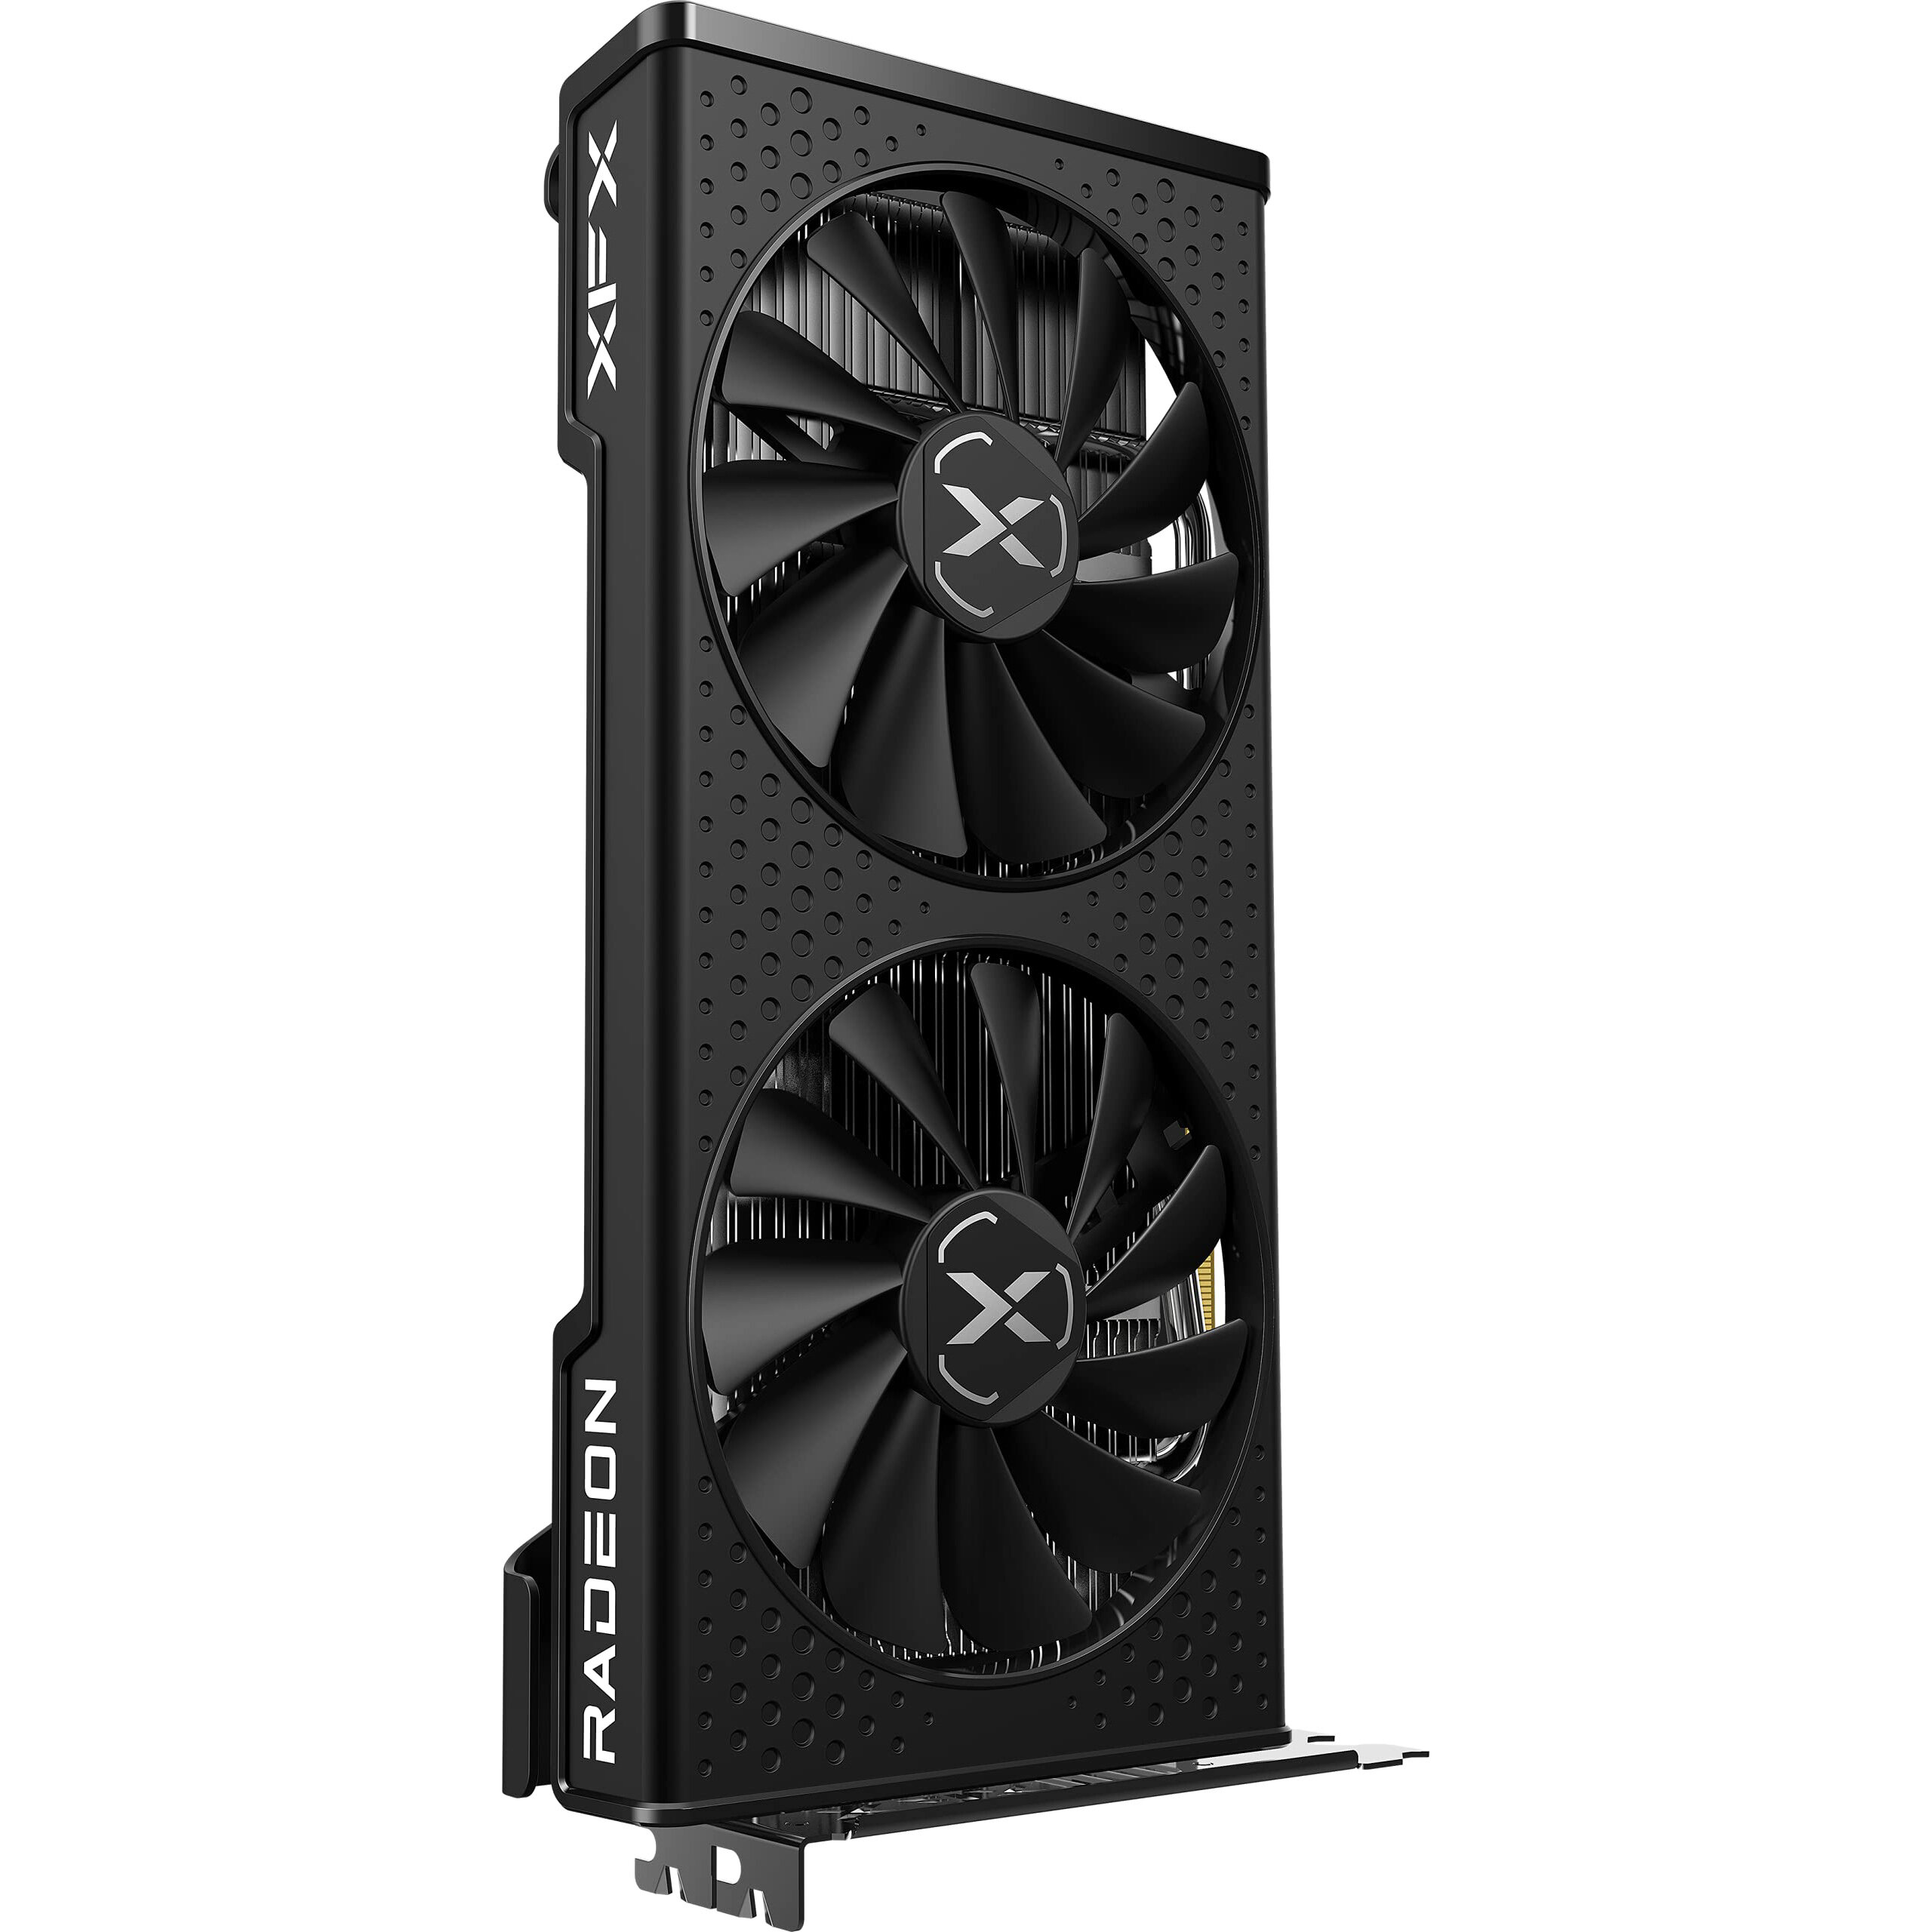 Image of XFX Speedster SWFT 210 Radeon RX 6600 CORE Gaming Graphics Card with 8GB GDDR6 HDMI 3xDP AMD RDNA 2